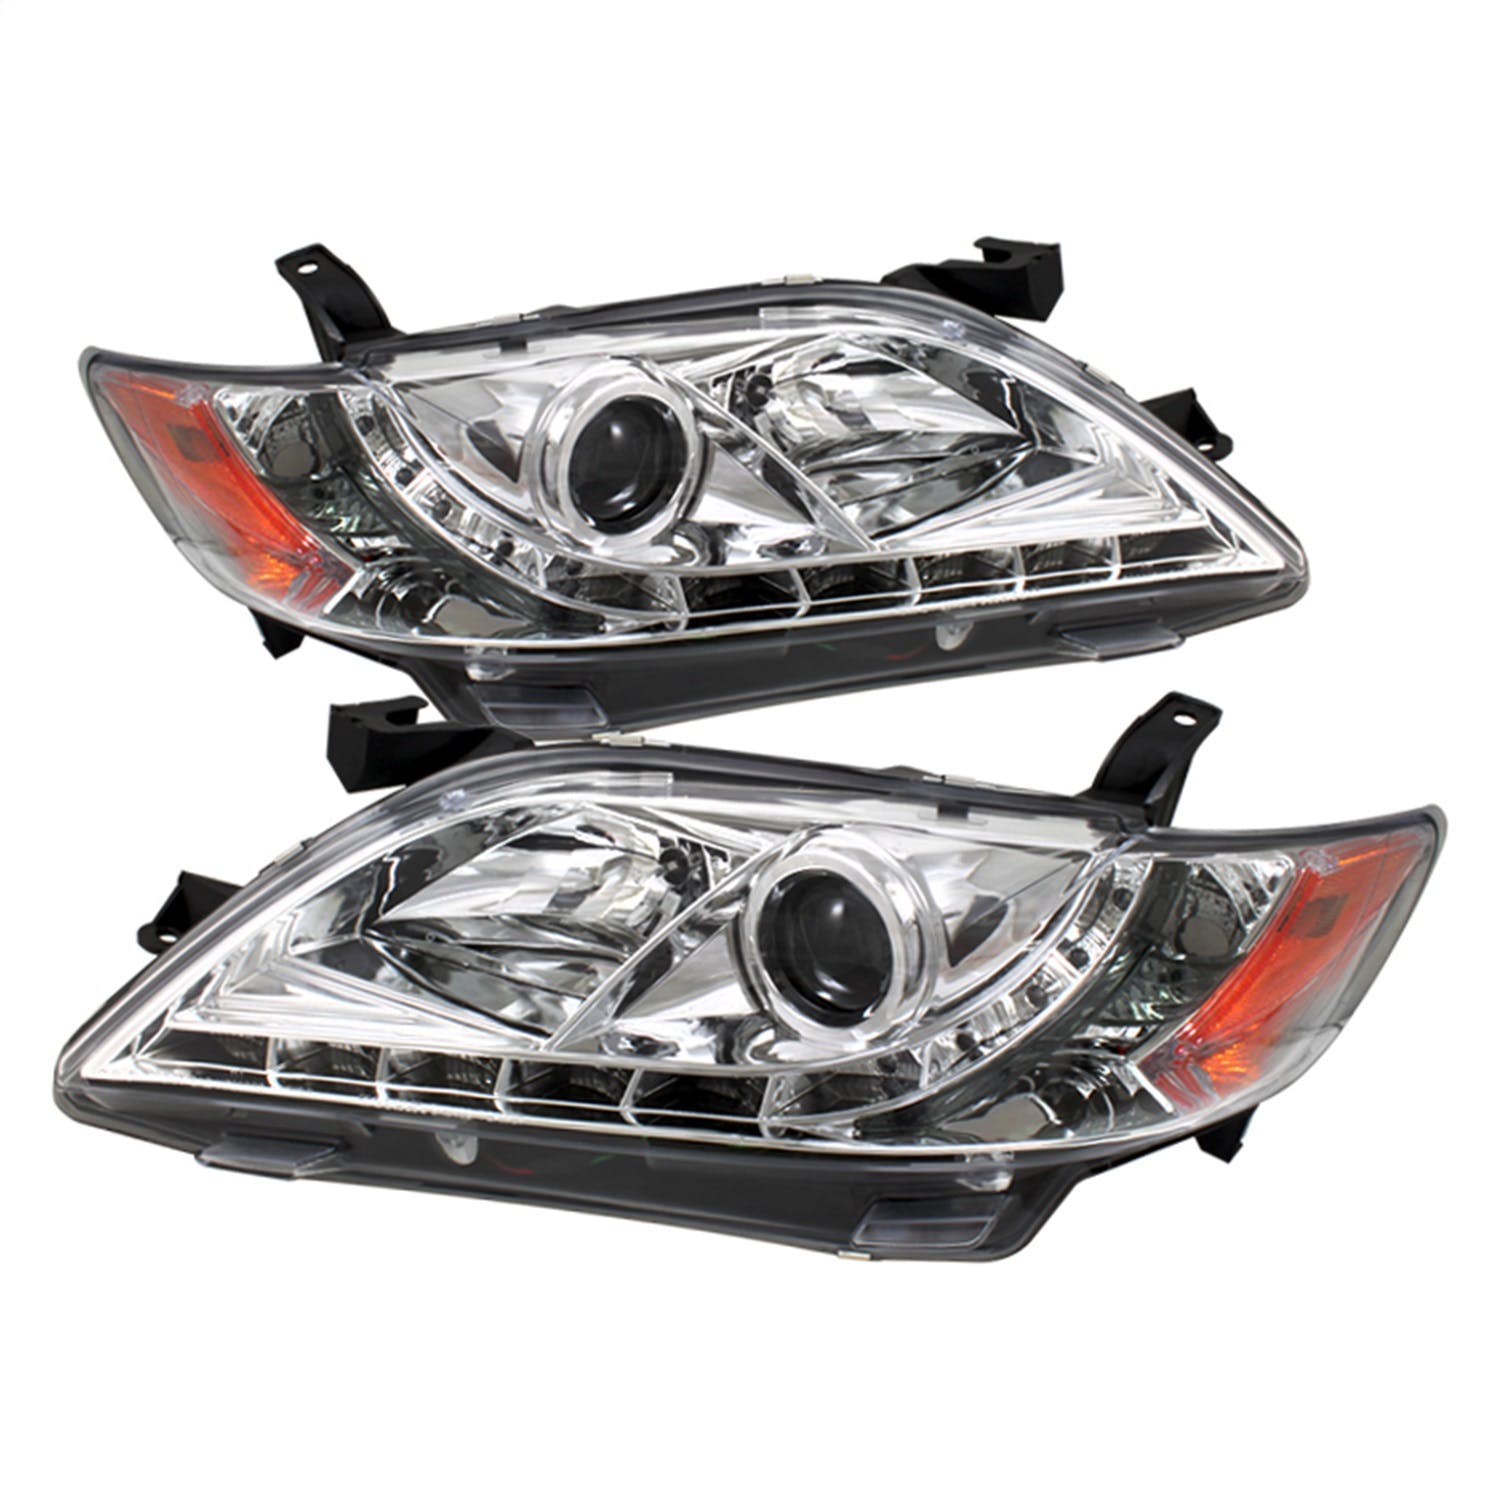 Spyder Auto 5039415 (Spyder) Toyota Camry 07-09 Projector Headlights-DRL-Chrome-High H1 (Included)-L